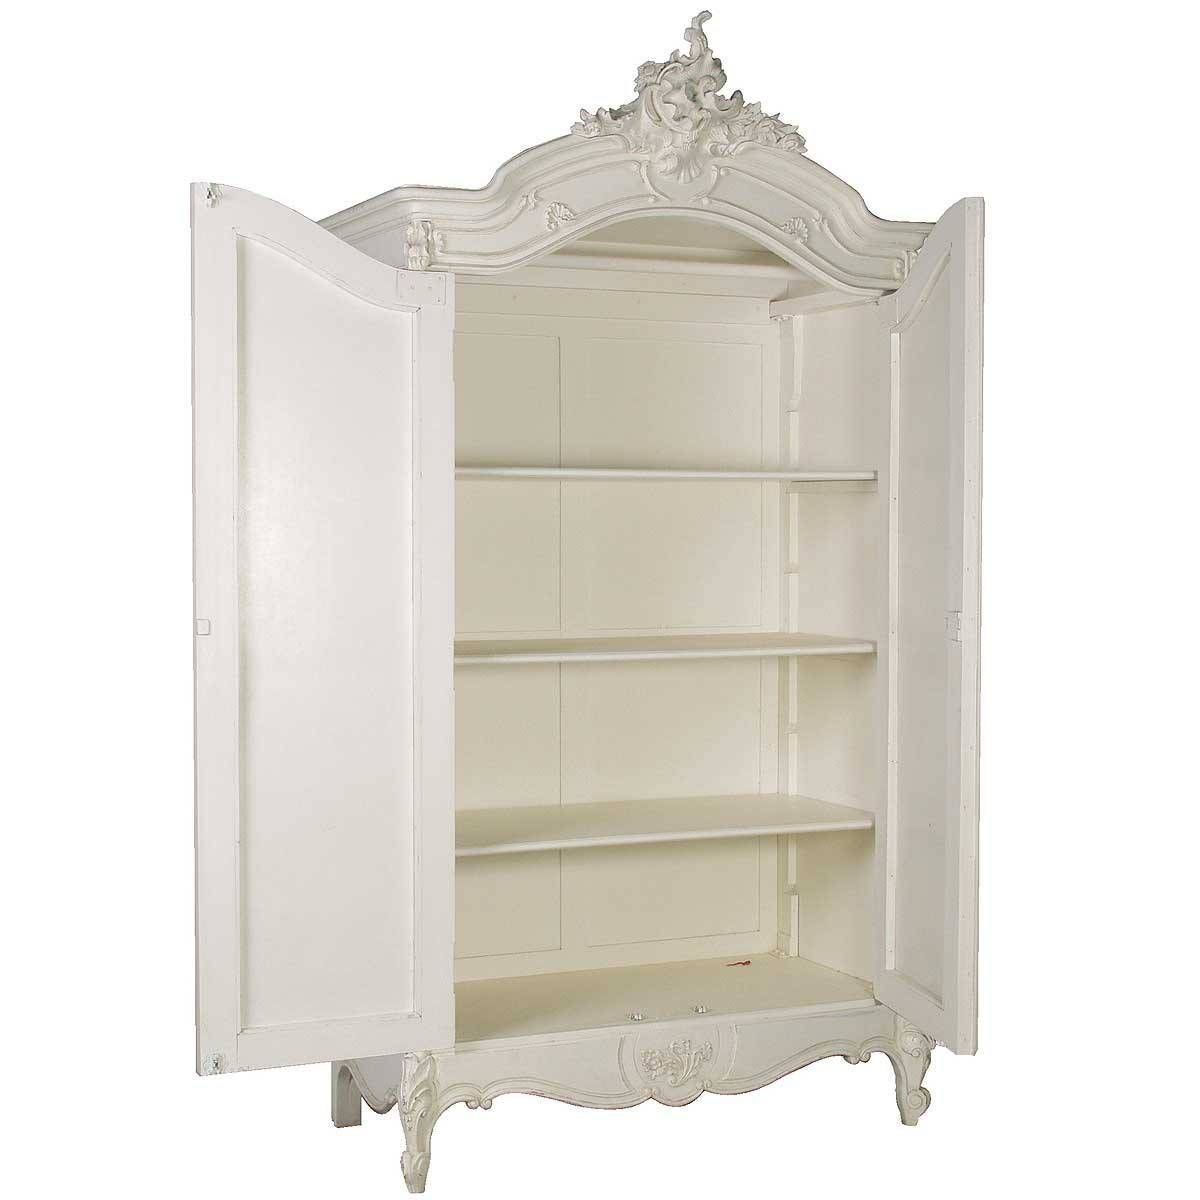 Provencal 2 Door Mirrored French Armoire | Armoire With Regard To Armoire French Wardrobes (View 11 of 15)